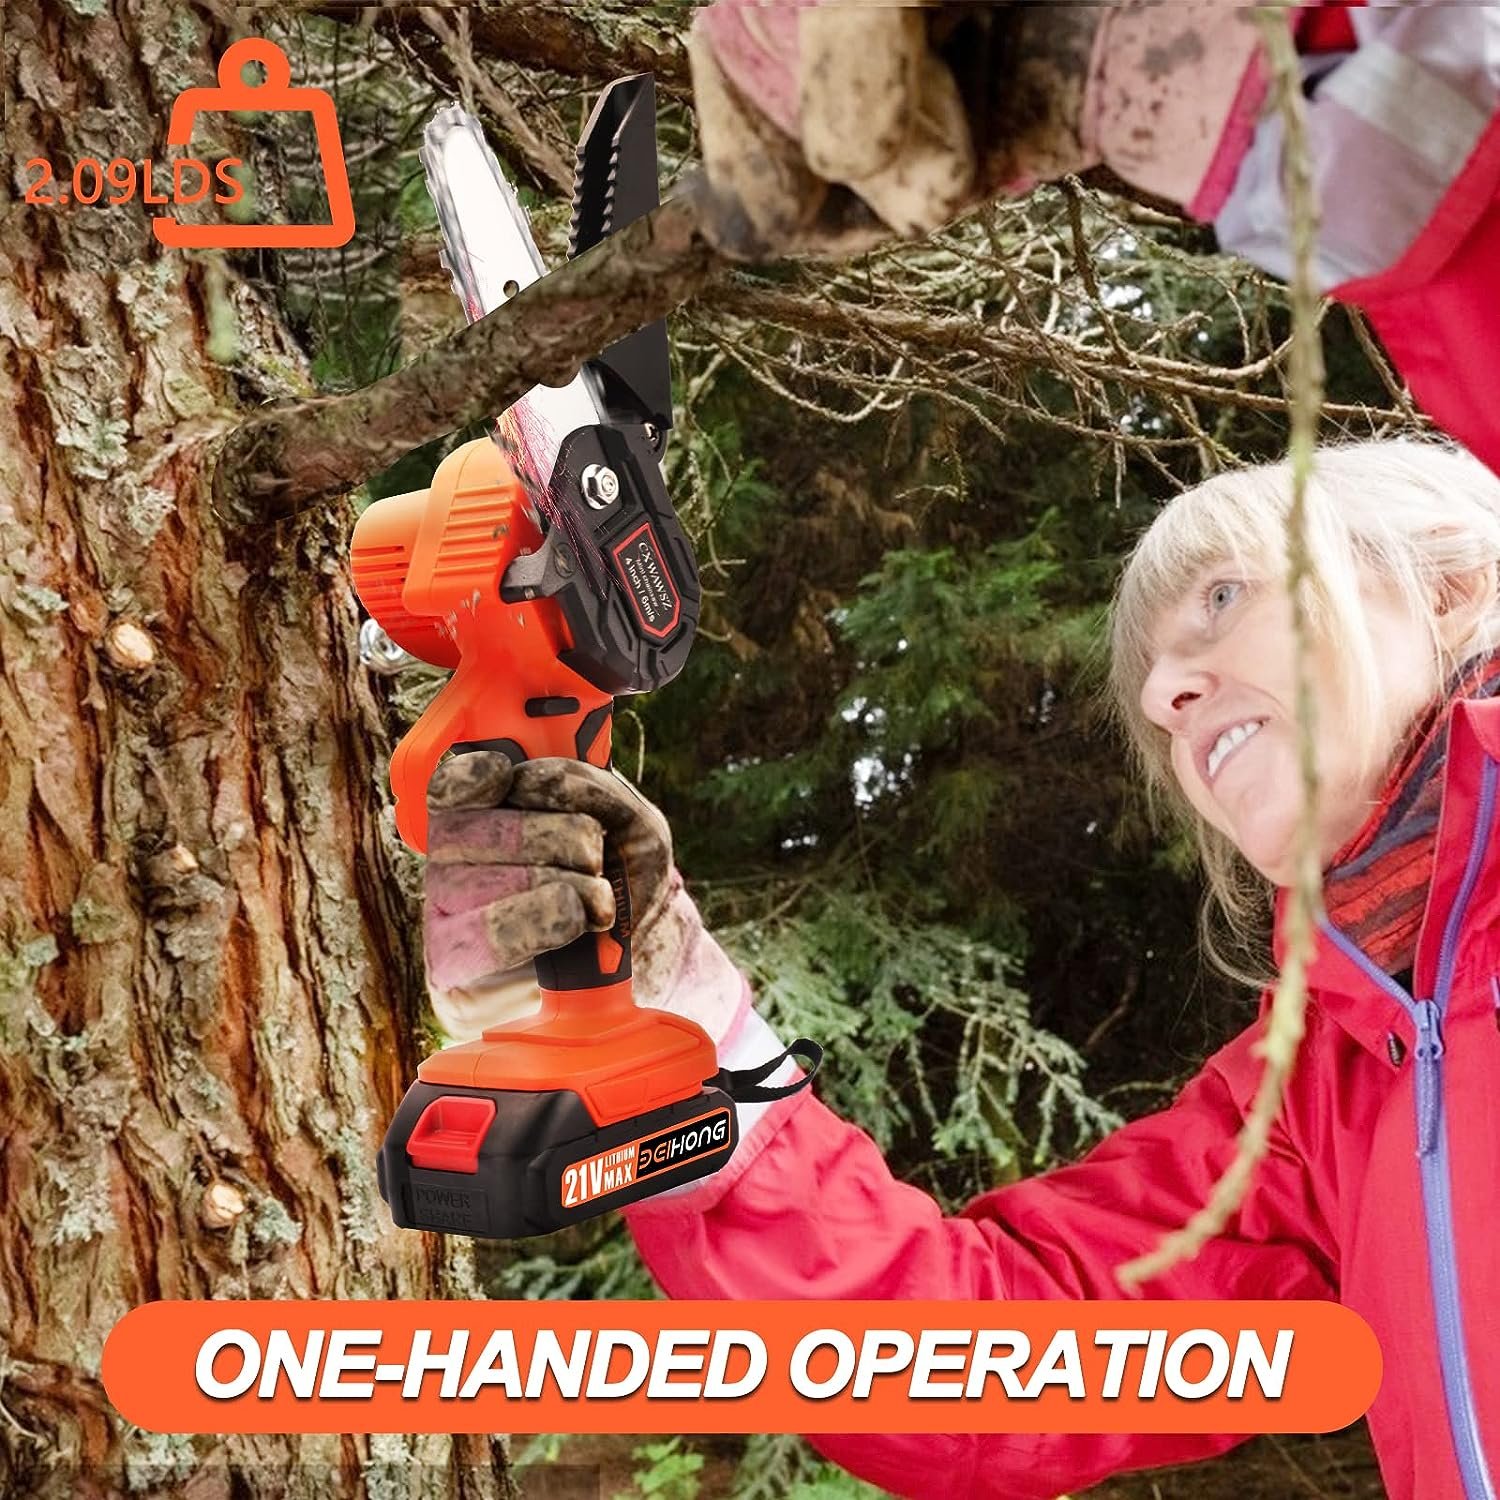 BEI & HONG Mini Chainsaw Cordless 6-Inch Review